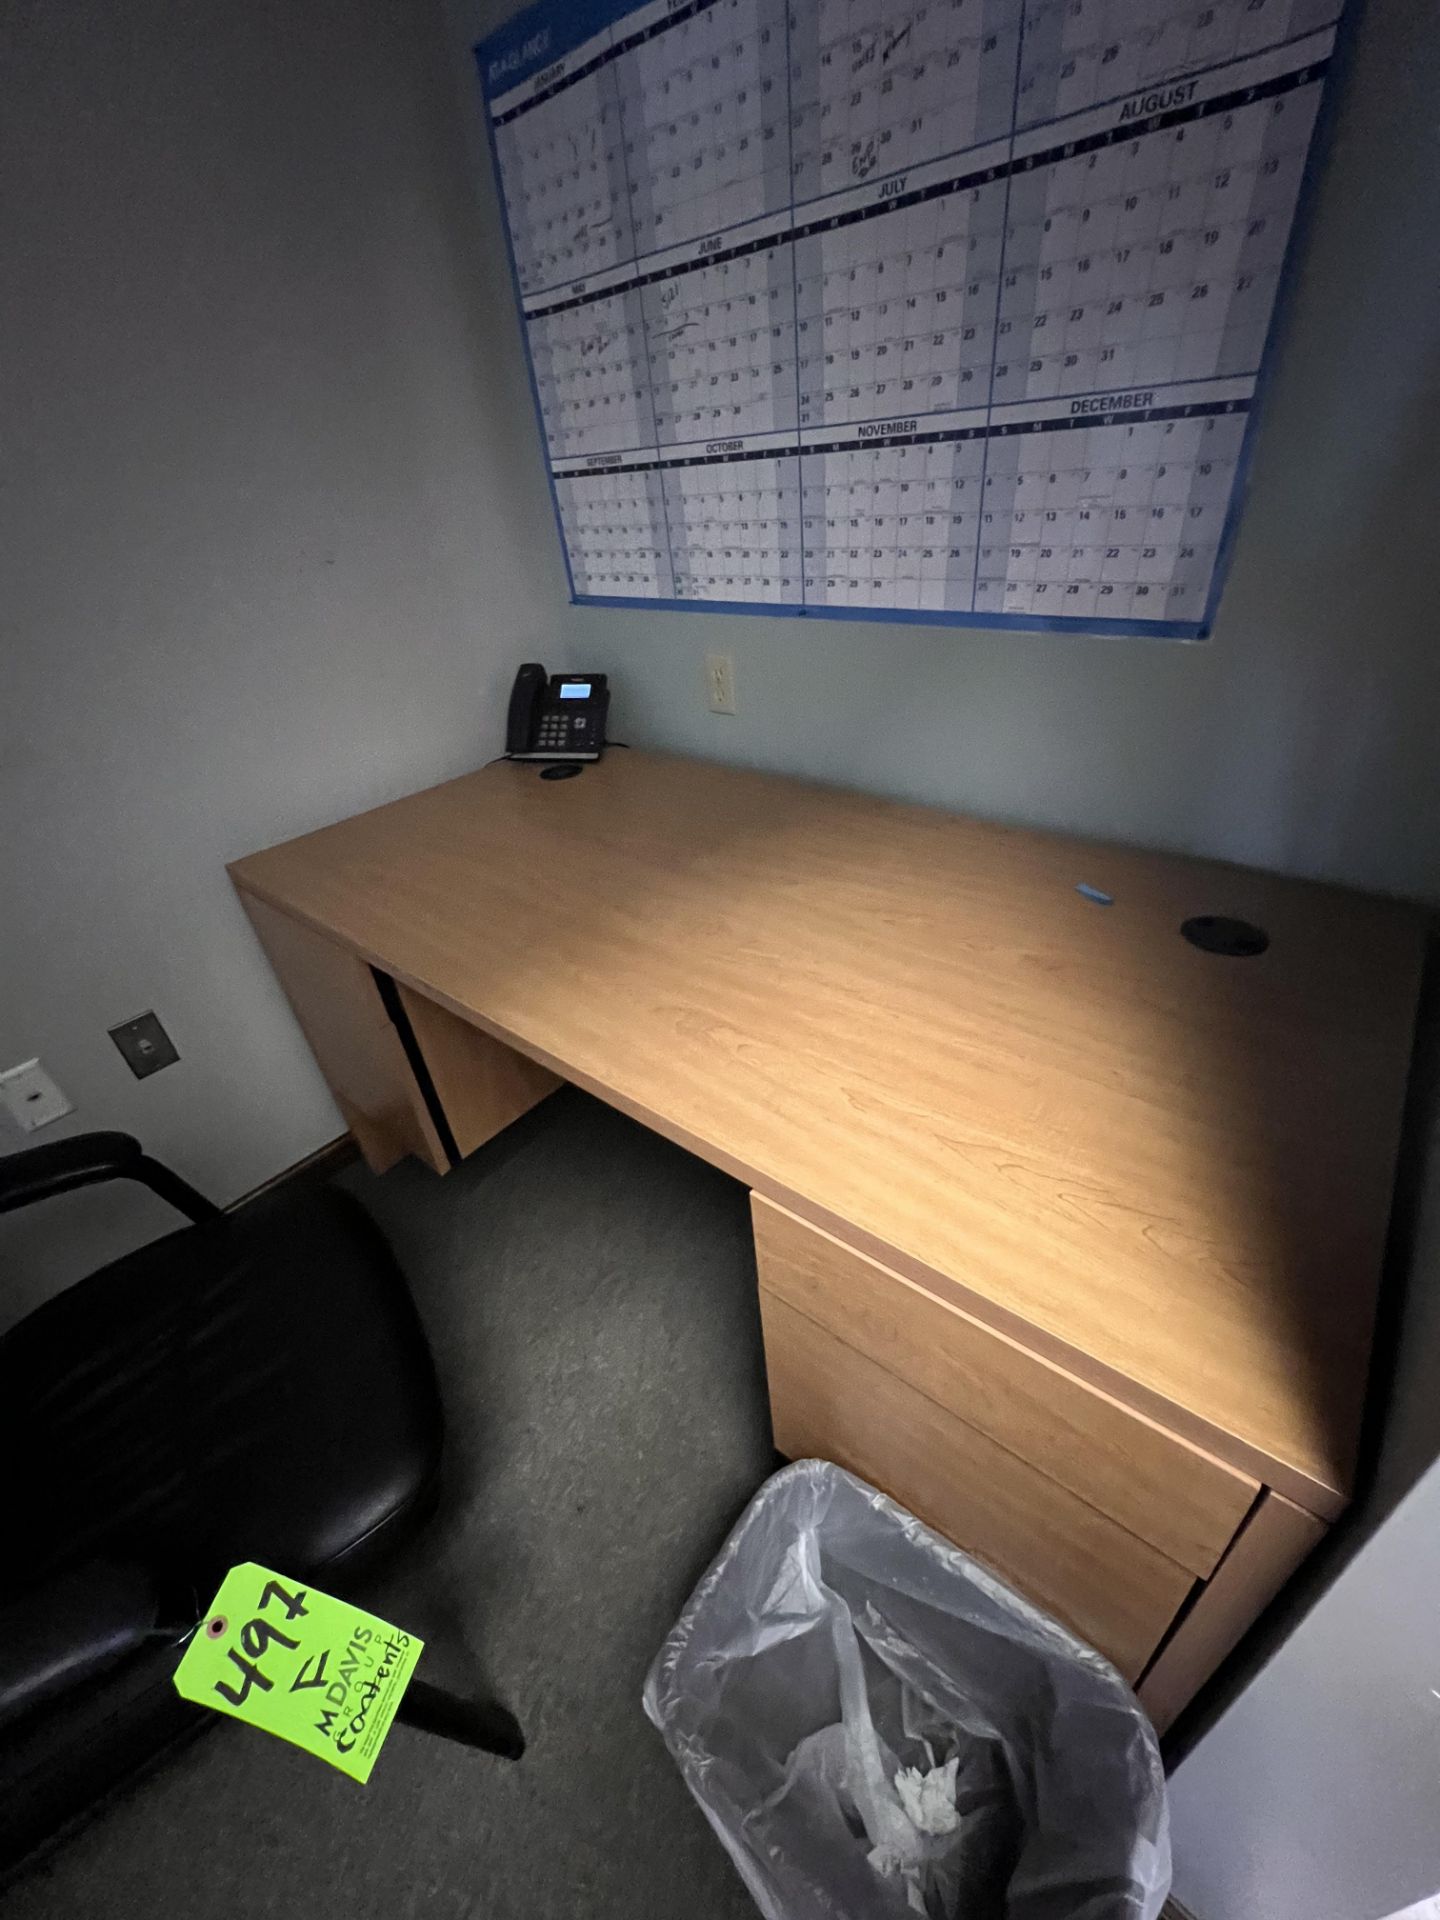 CONTENTS OF OFFICE, INCLUDES DESK AND CHAIR, DOES NOT INCLUDE PHONE - Image 2 of 2